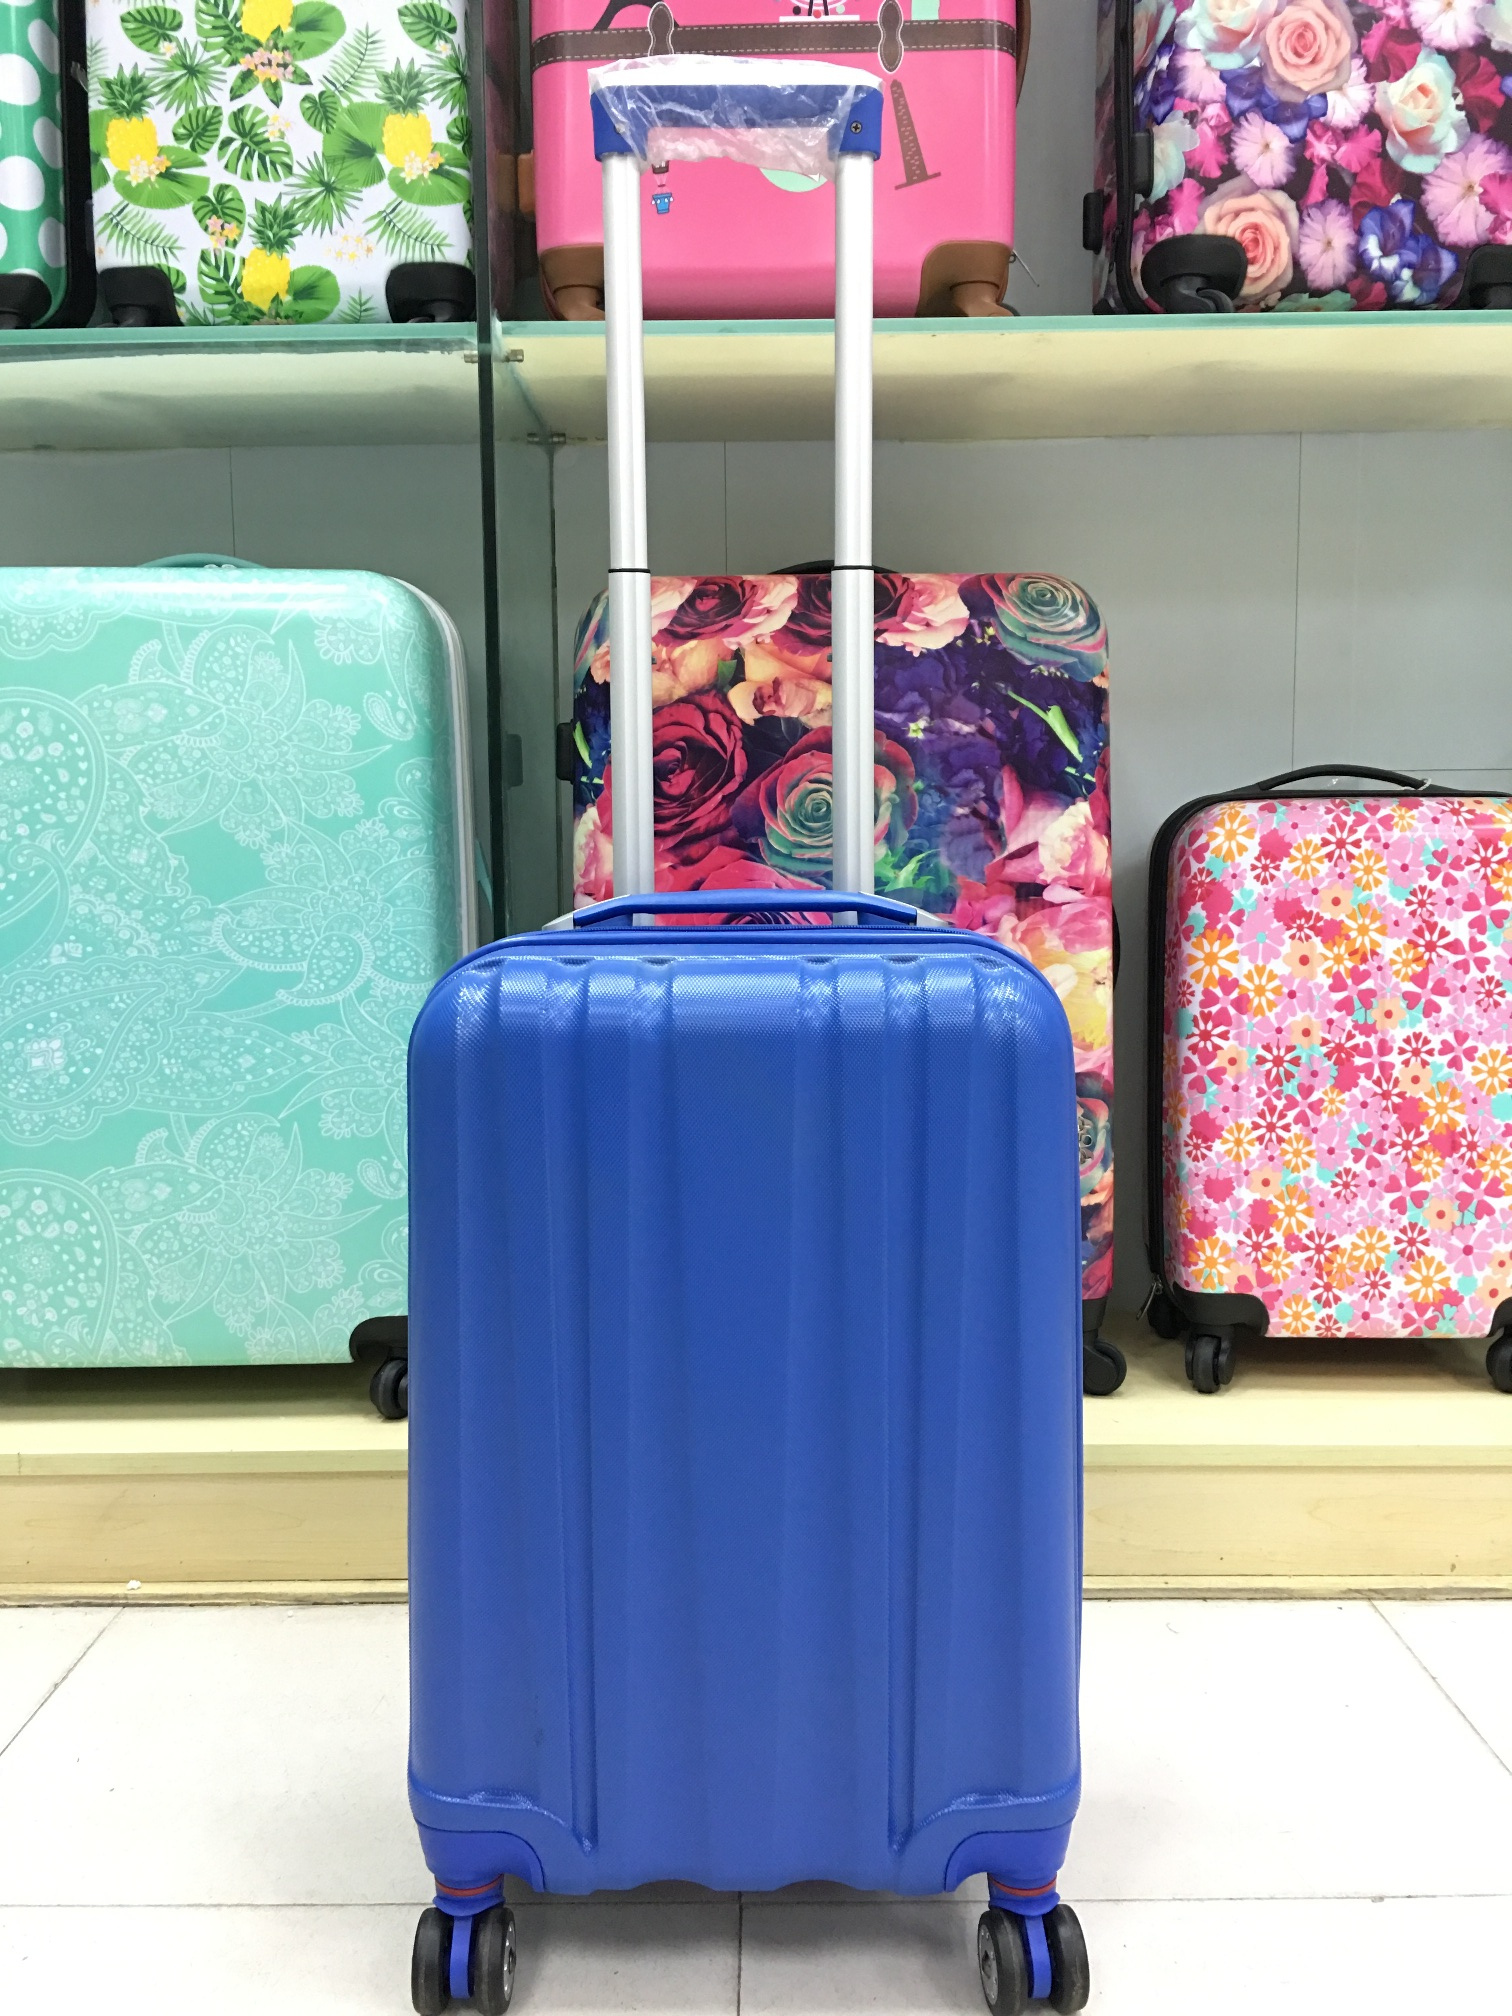 yanteng lightweight cabin luggage in blue color